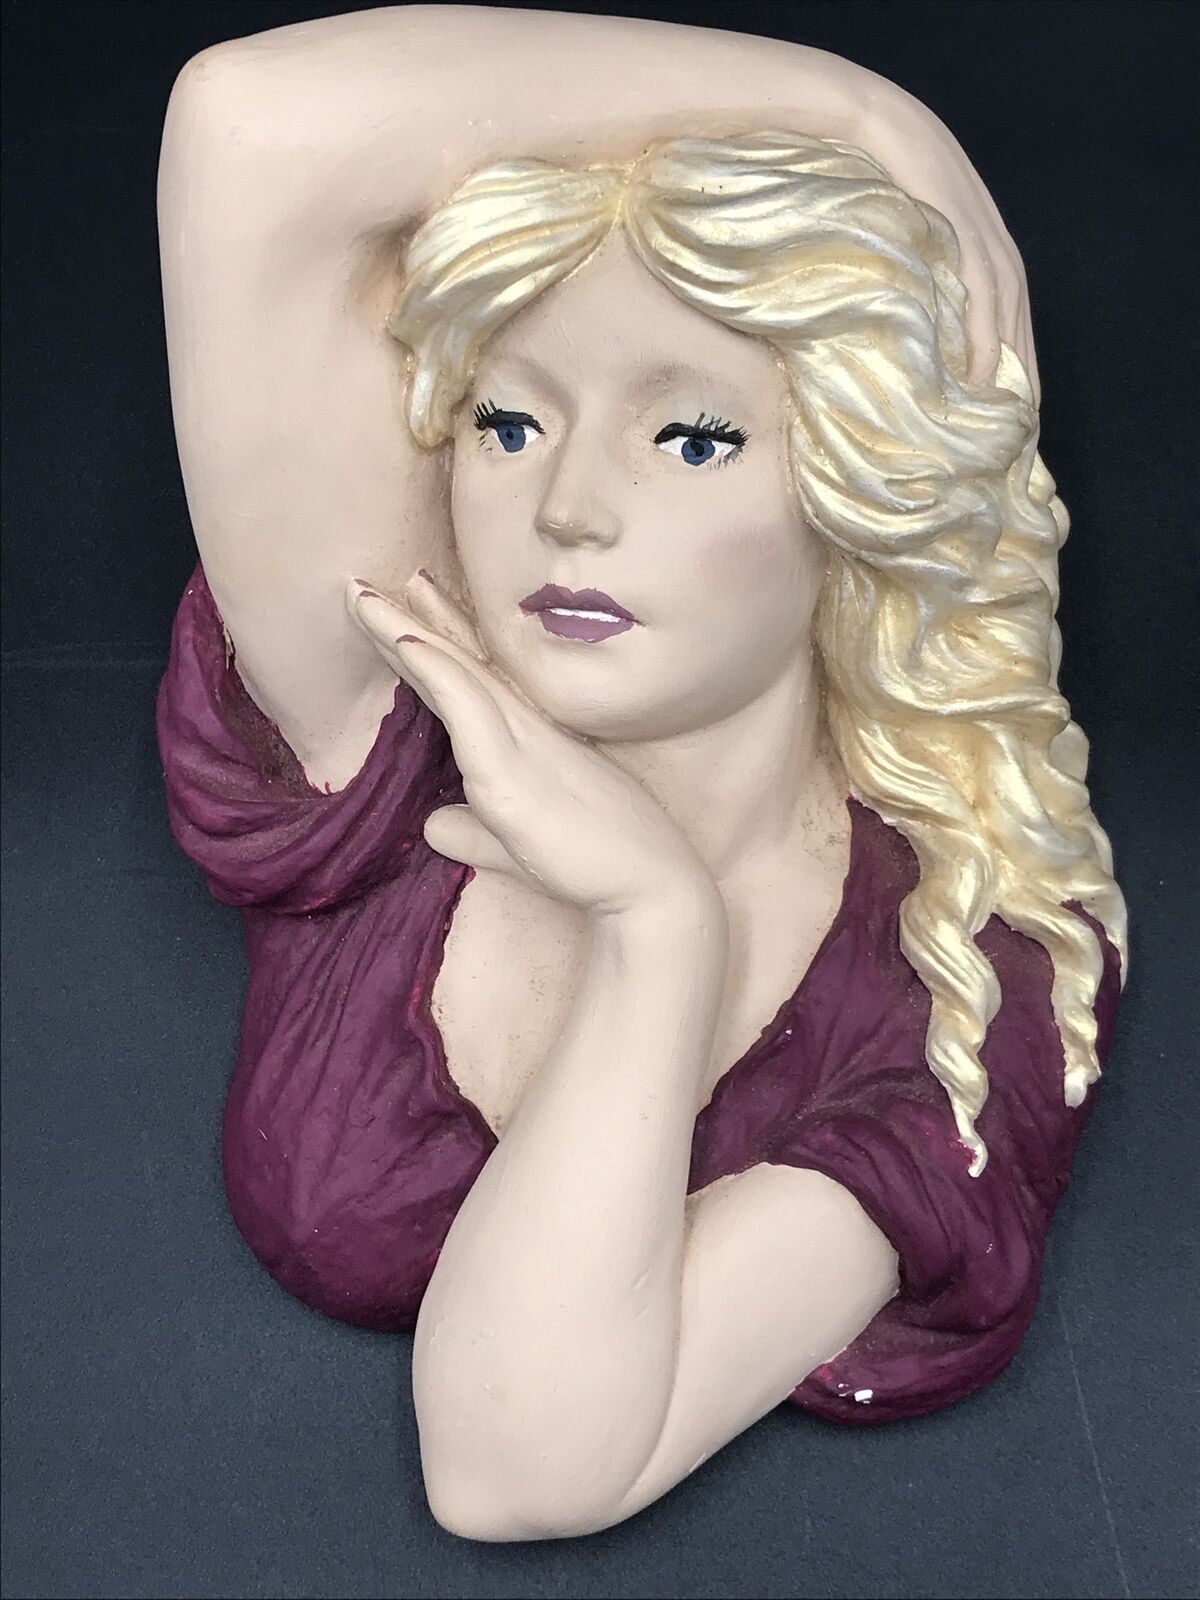 Vintage Chalkware Bust of a Young Woman Long Blonde Hair Posing. Stunning.  7.5”